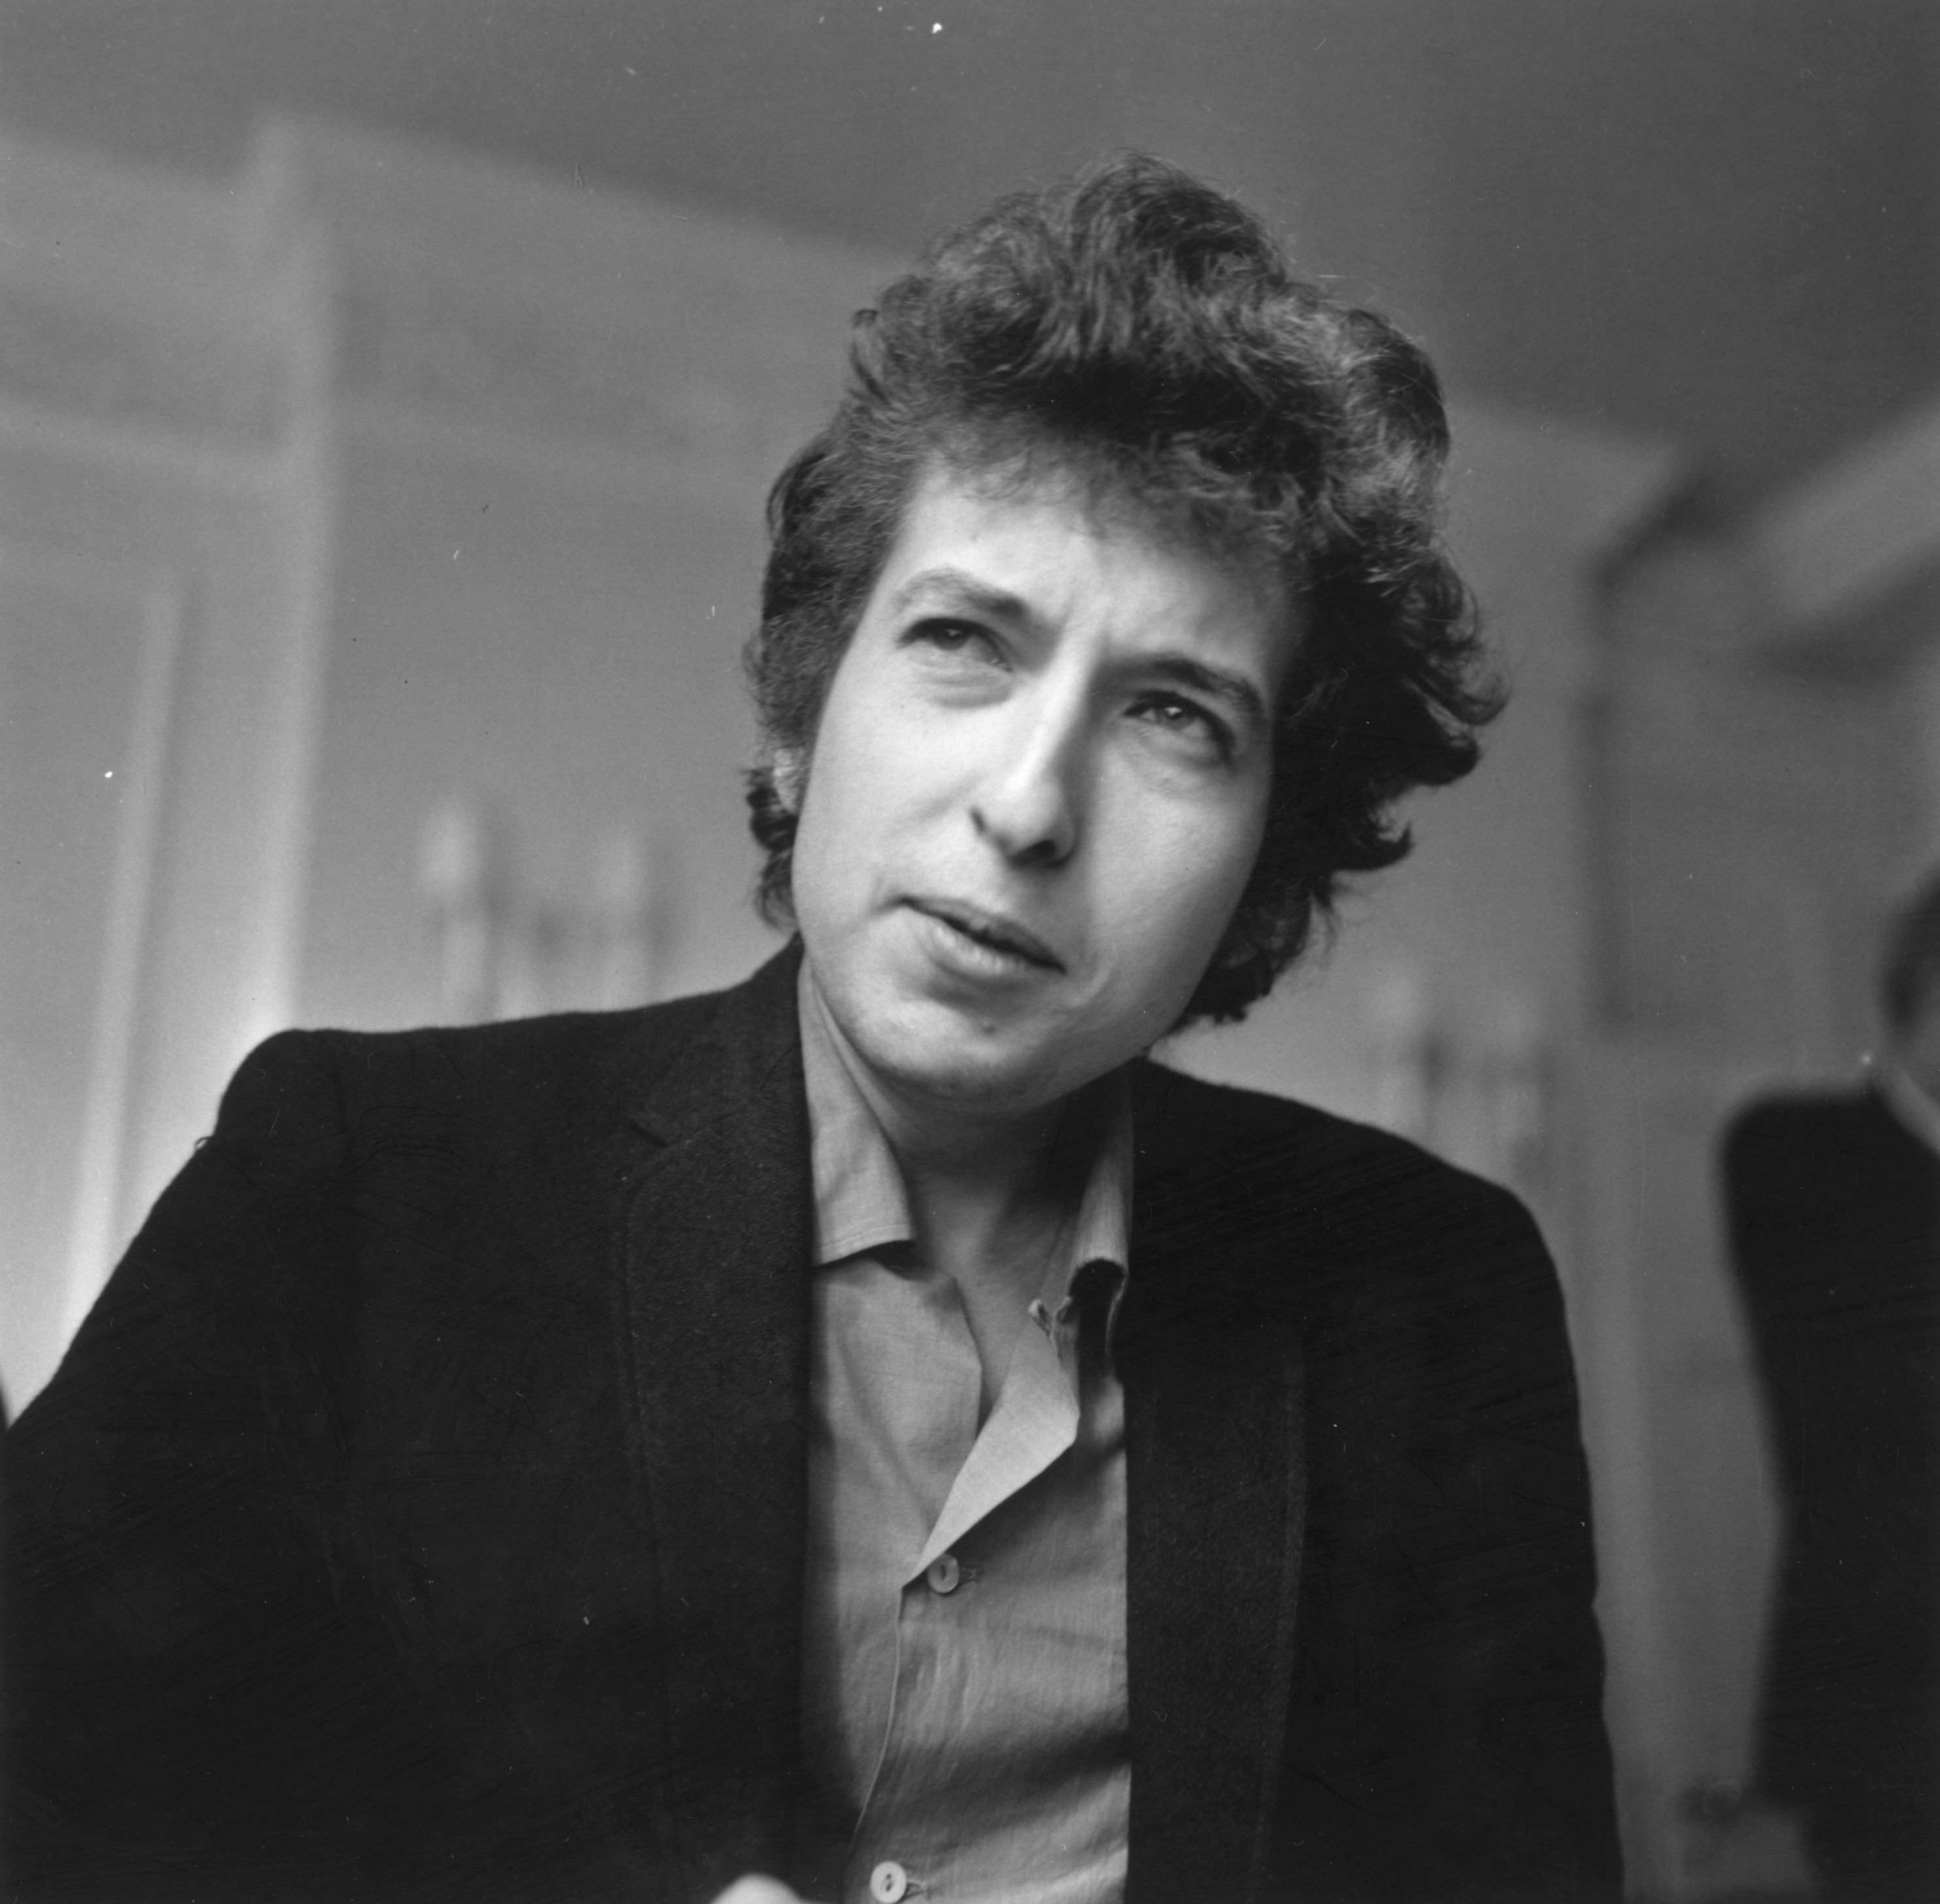 A black and white picture of Bob Dylan wearing a jacket and button down.